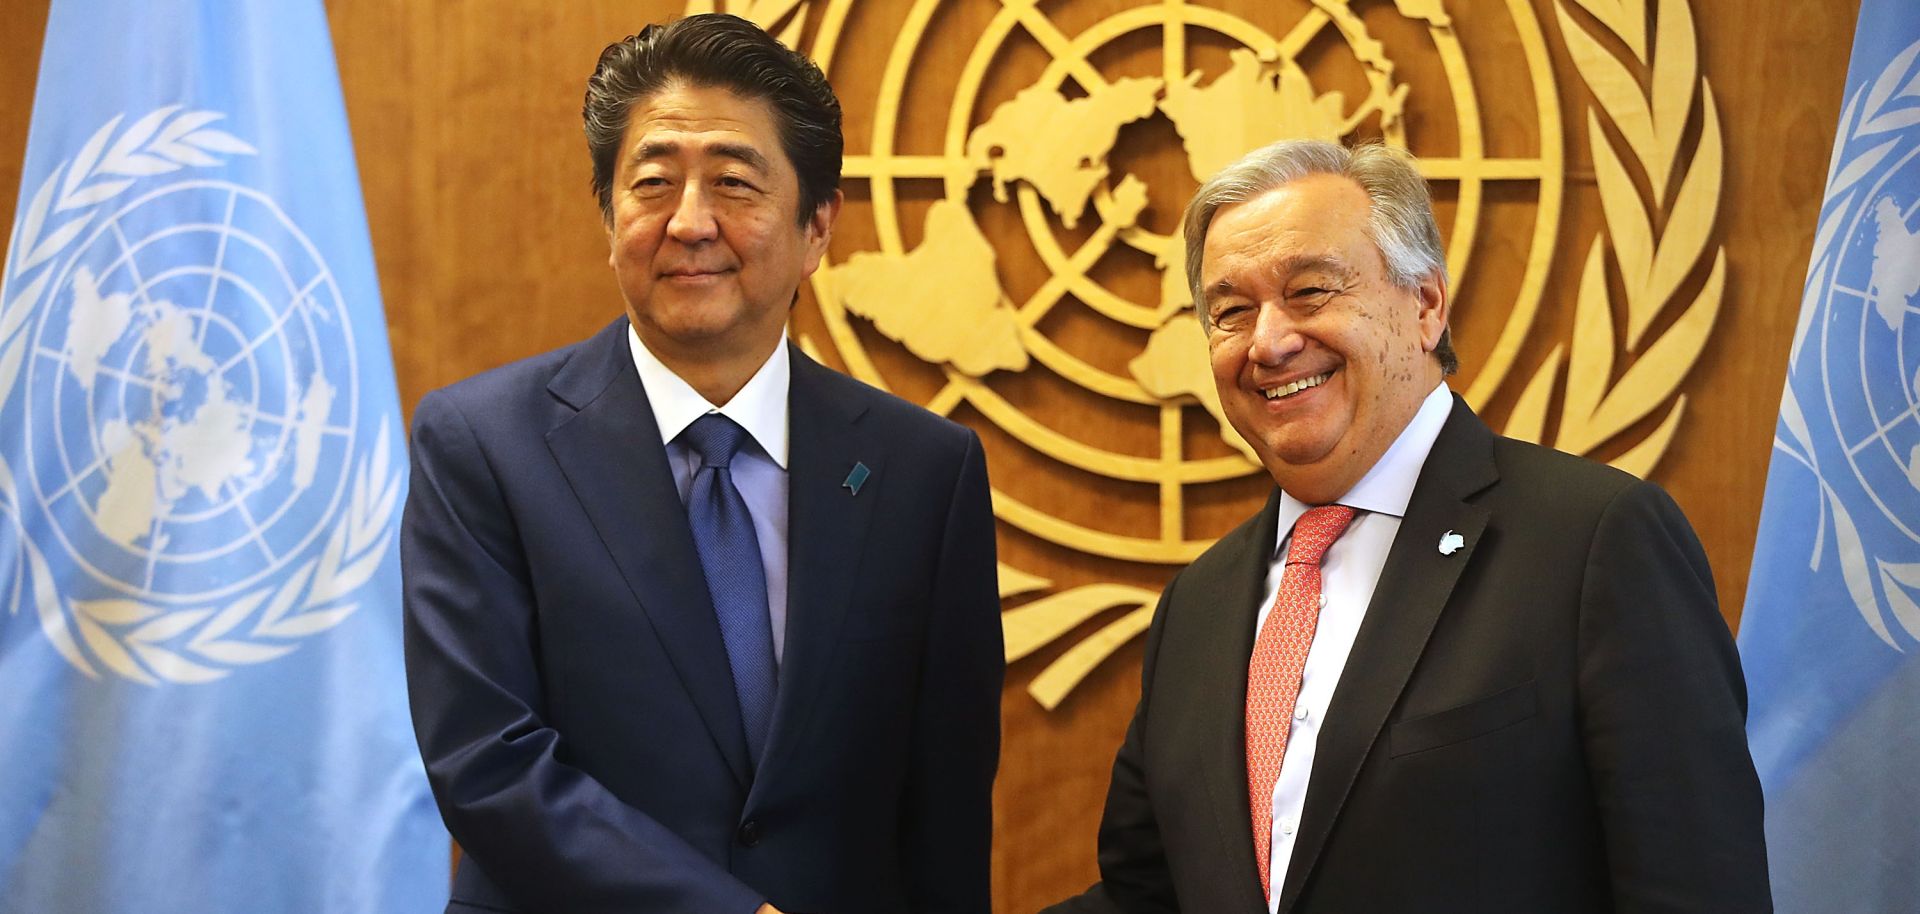 Then-Japanese Prime Minister Shinzo Abe shakes hands with the Secretary-General of the United Nations in New York City during the 73rd U.N. General Assembly on Sept. 25, 2018. 